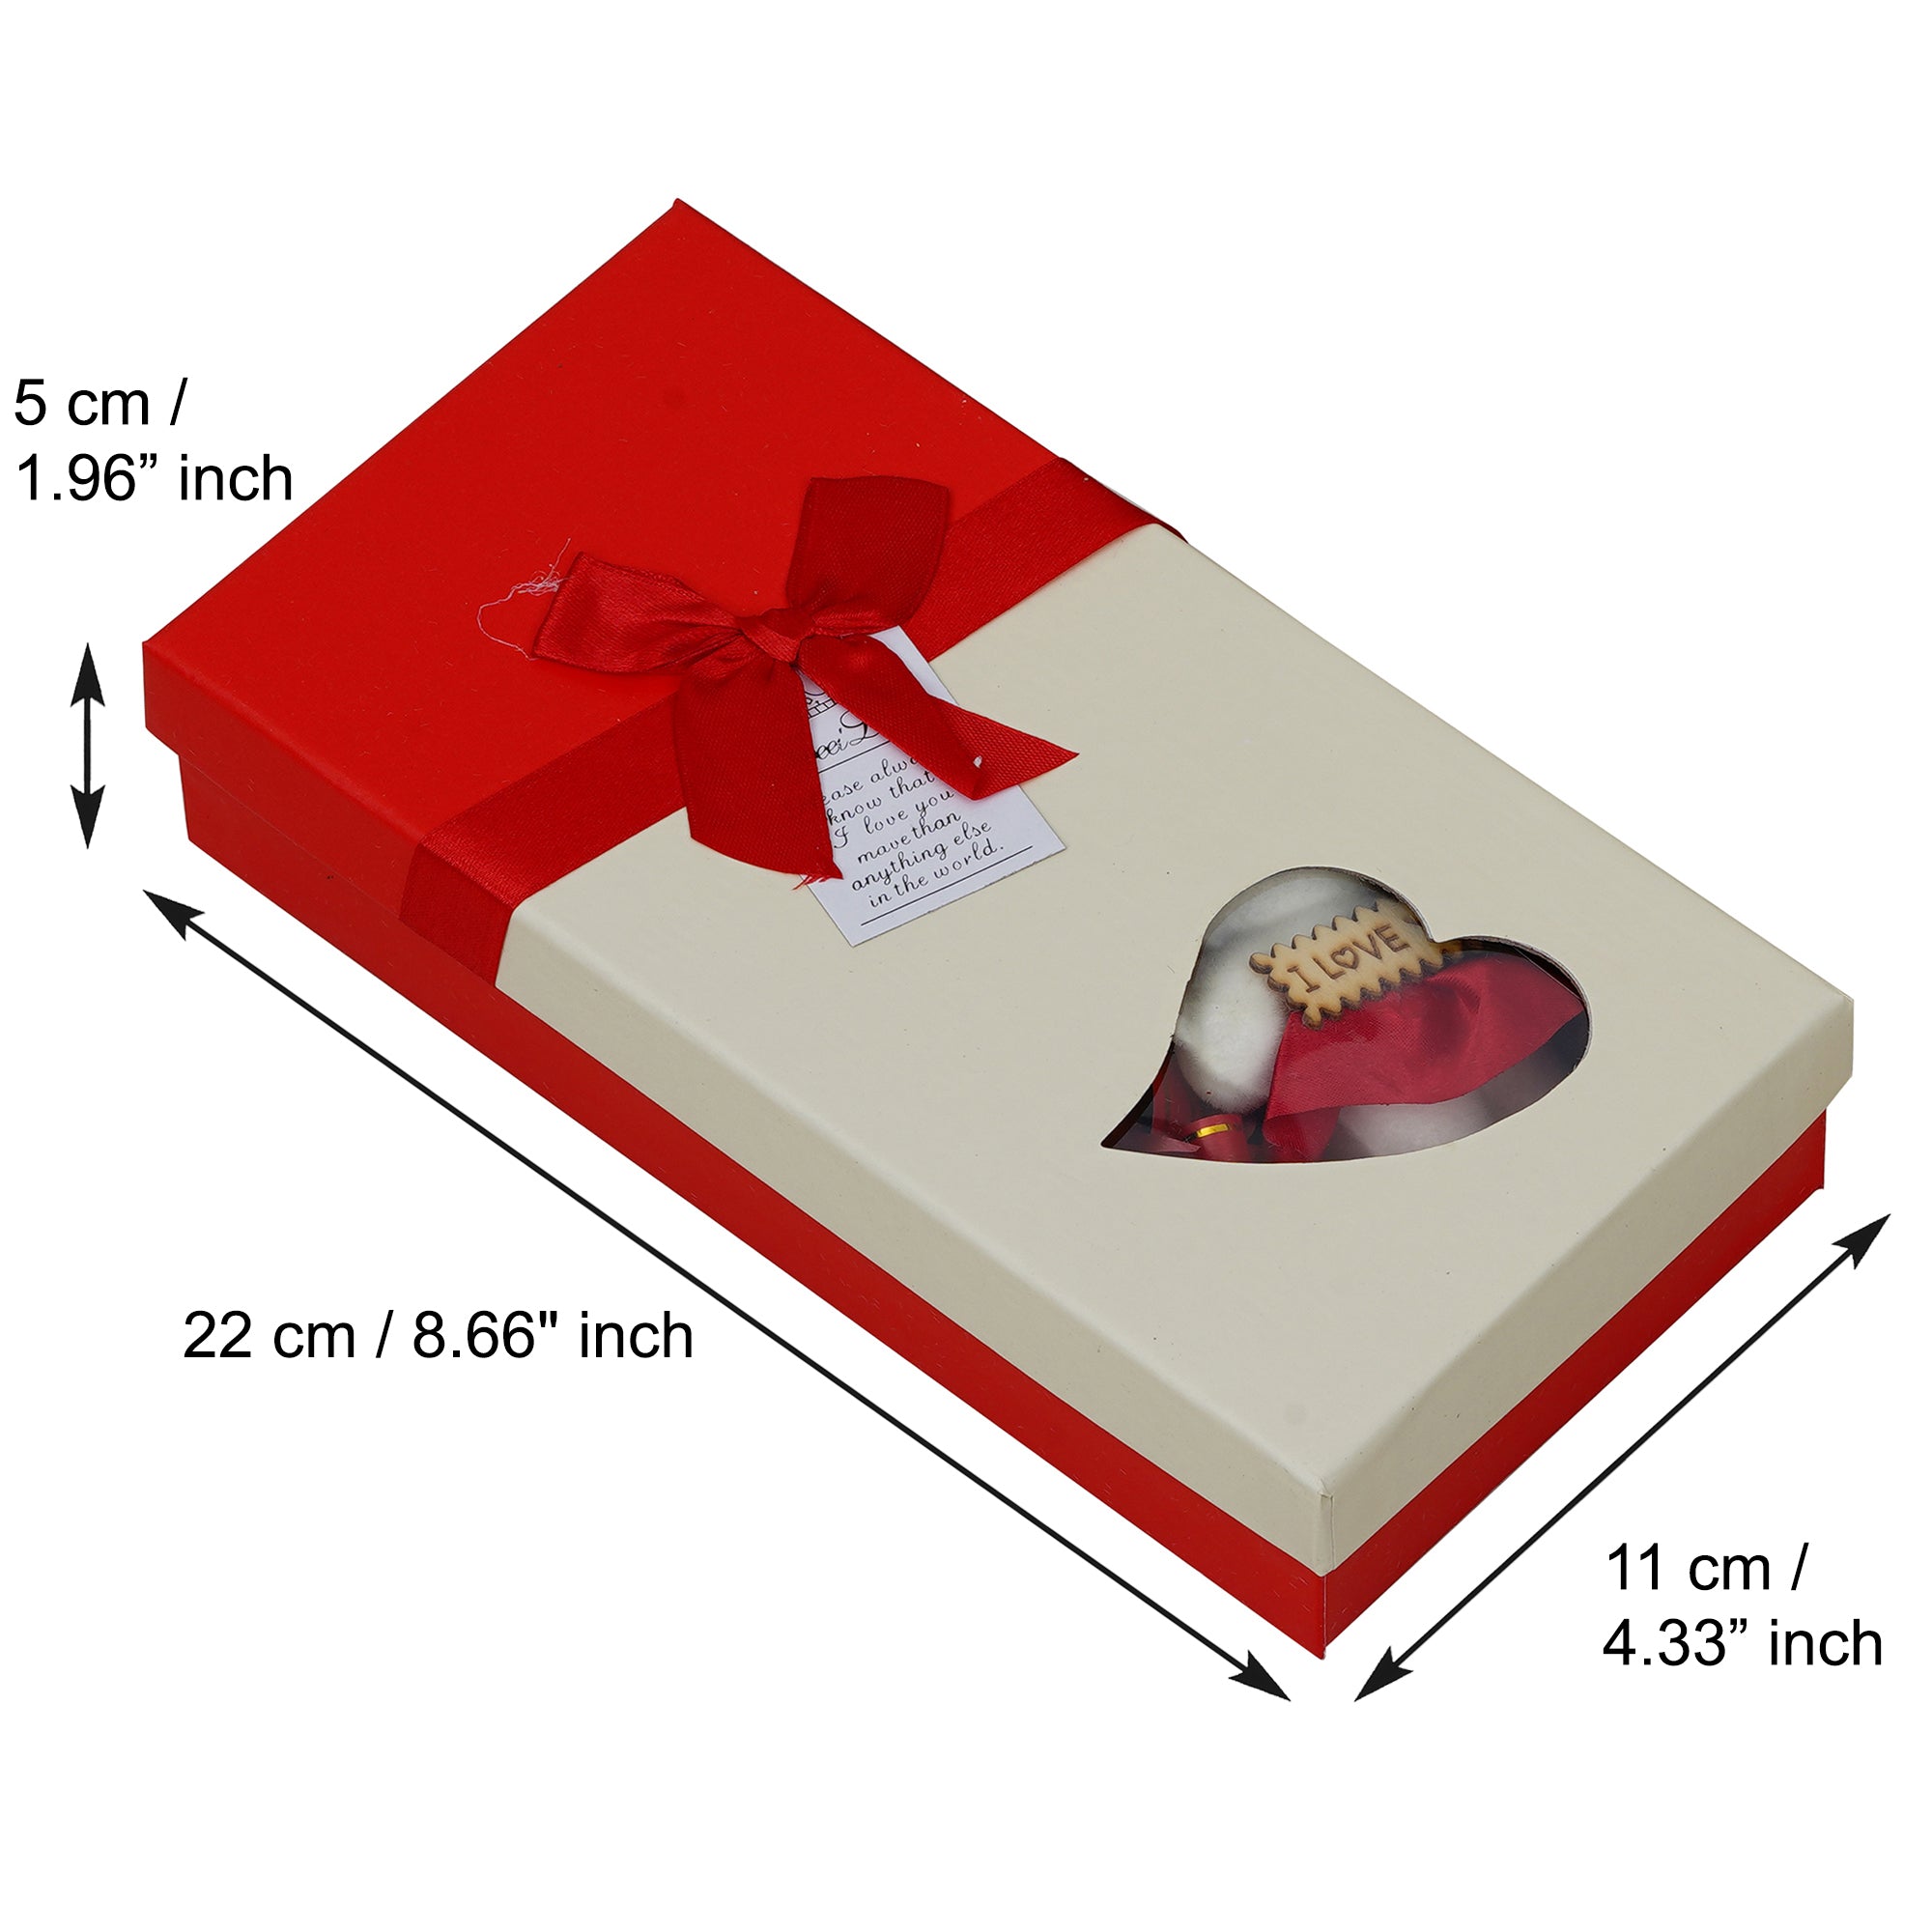 Red Roses Bouqet with White & Red Teddy Bear Valentine's Square Shaped Gift Box 4